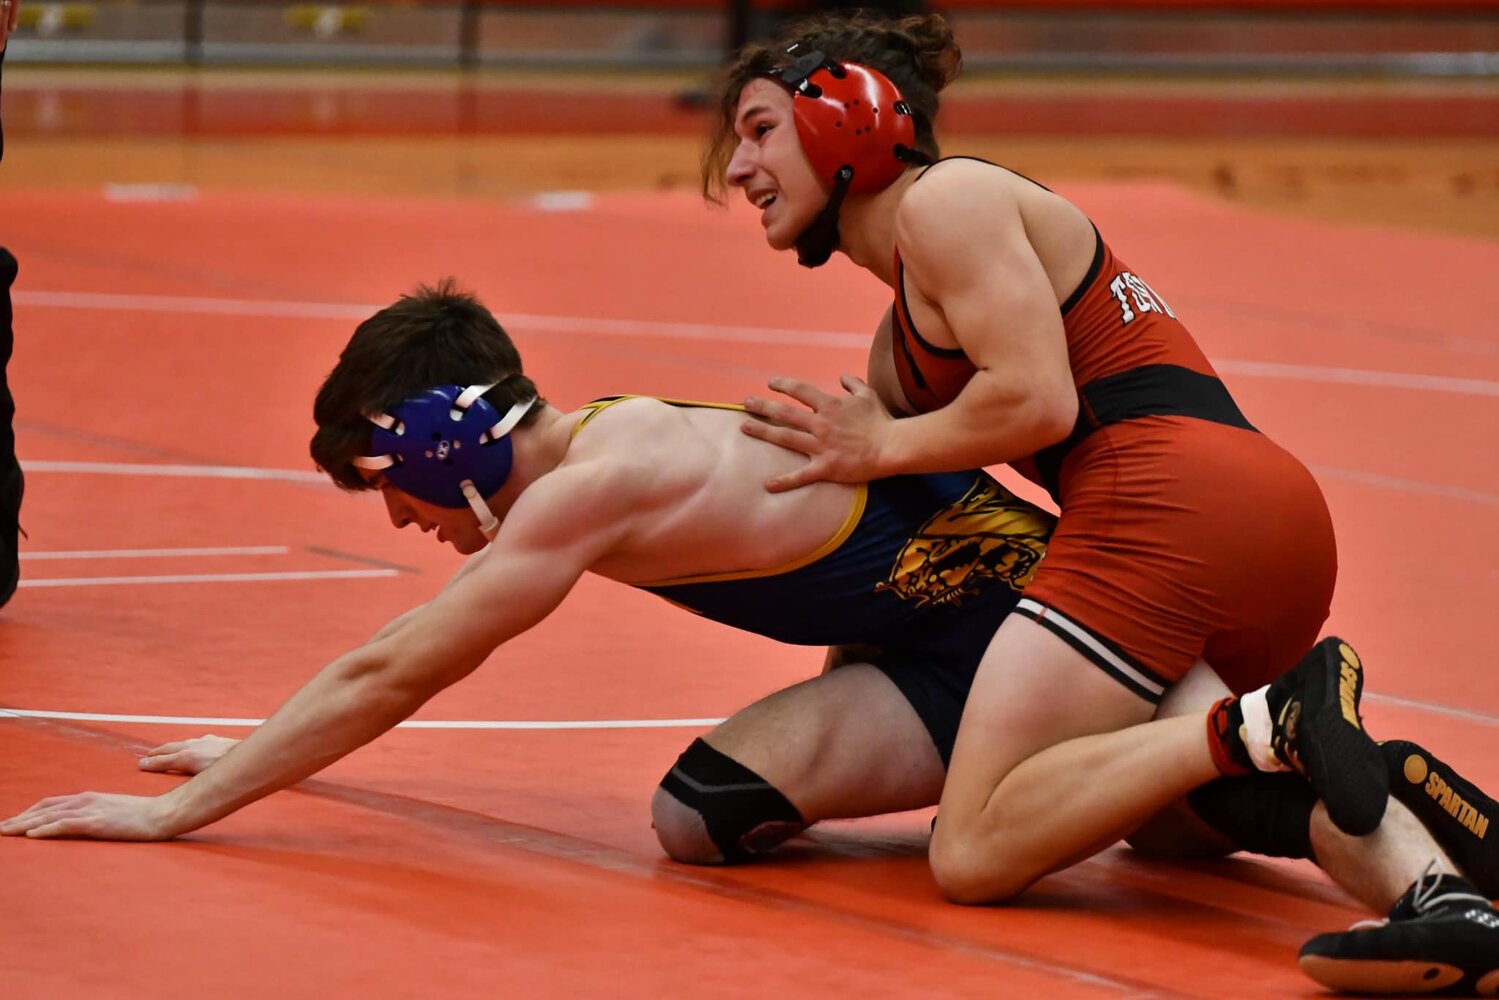 Charlie Phillips of EP picking up another win this year in his match with North Providence. Tania Philips photo